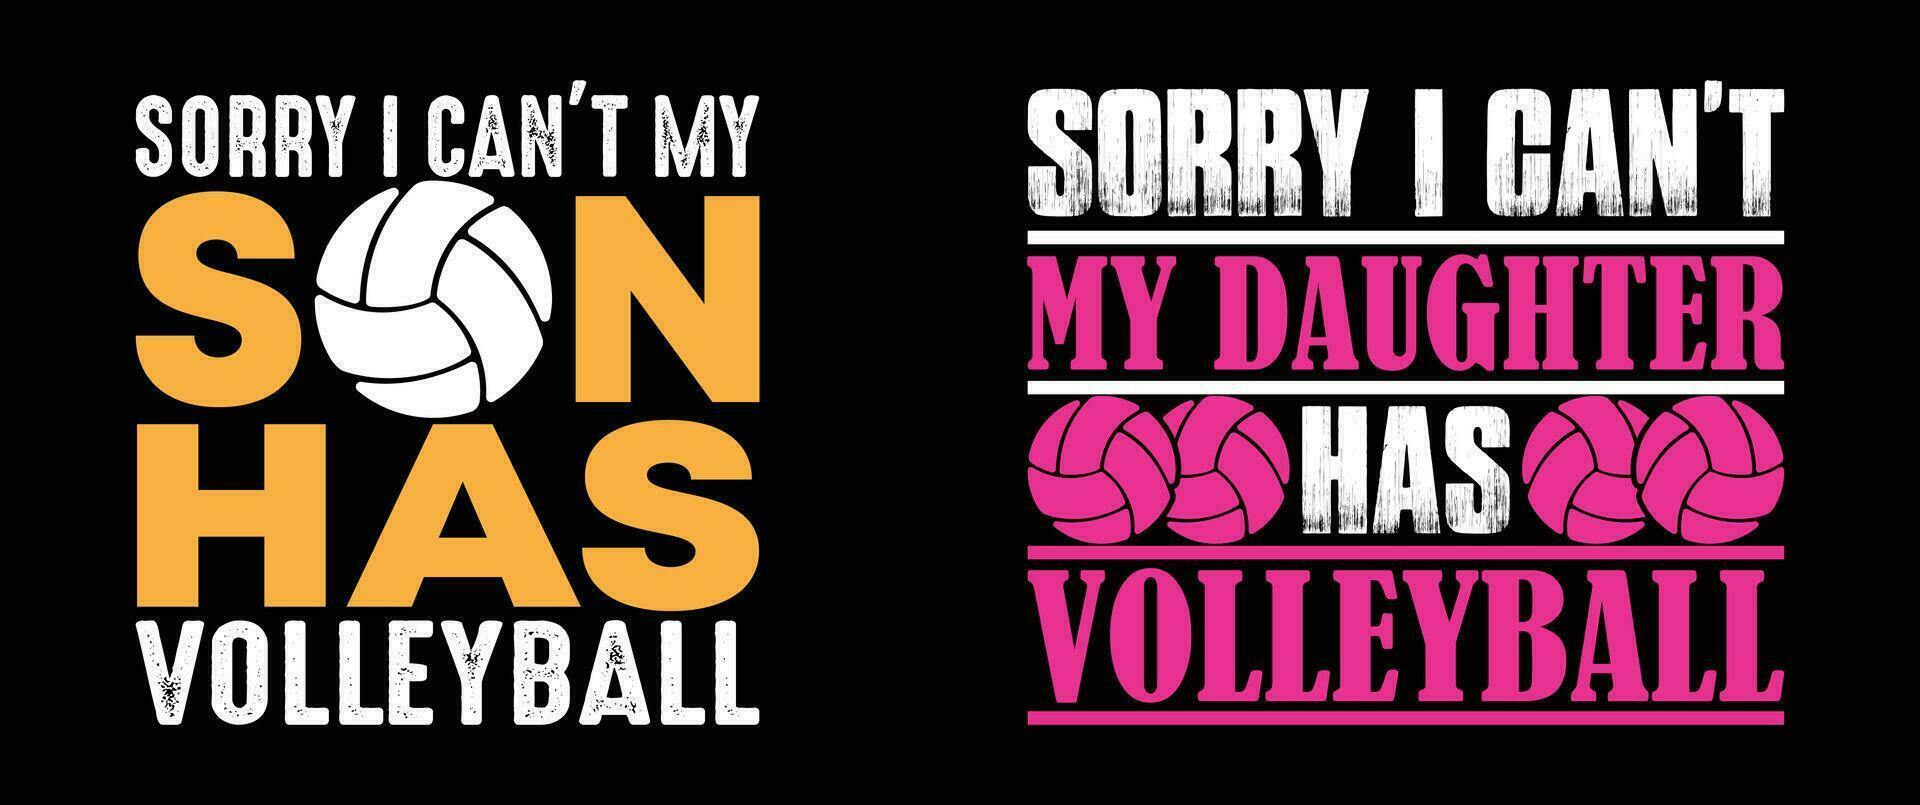 Sorry I Can't My Daughter Has Volleyball, Volleyball T shirt Design Bundle, Vector Volleyball, Sorry I Can't My Daughter Has Volleyball, T shirt  design, Volleyball shirt,